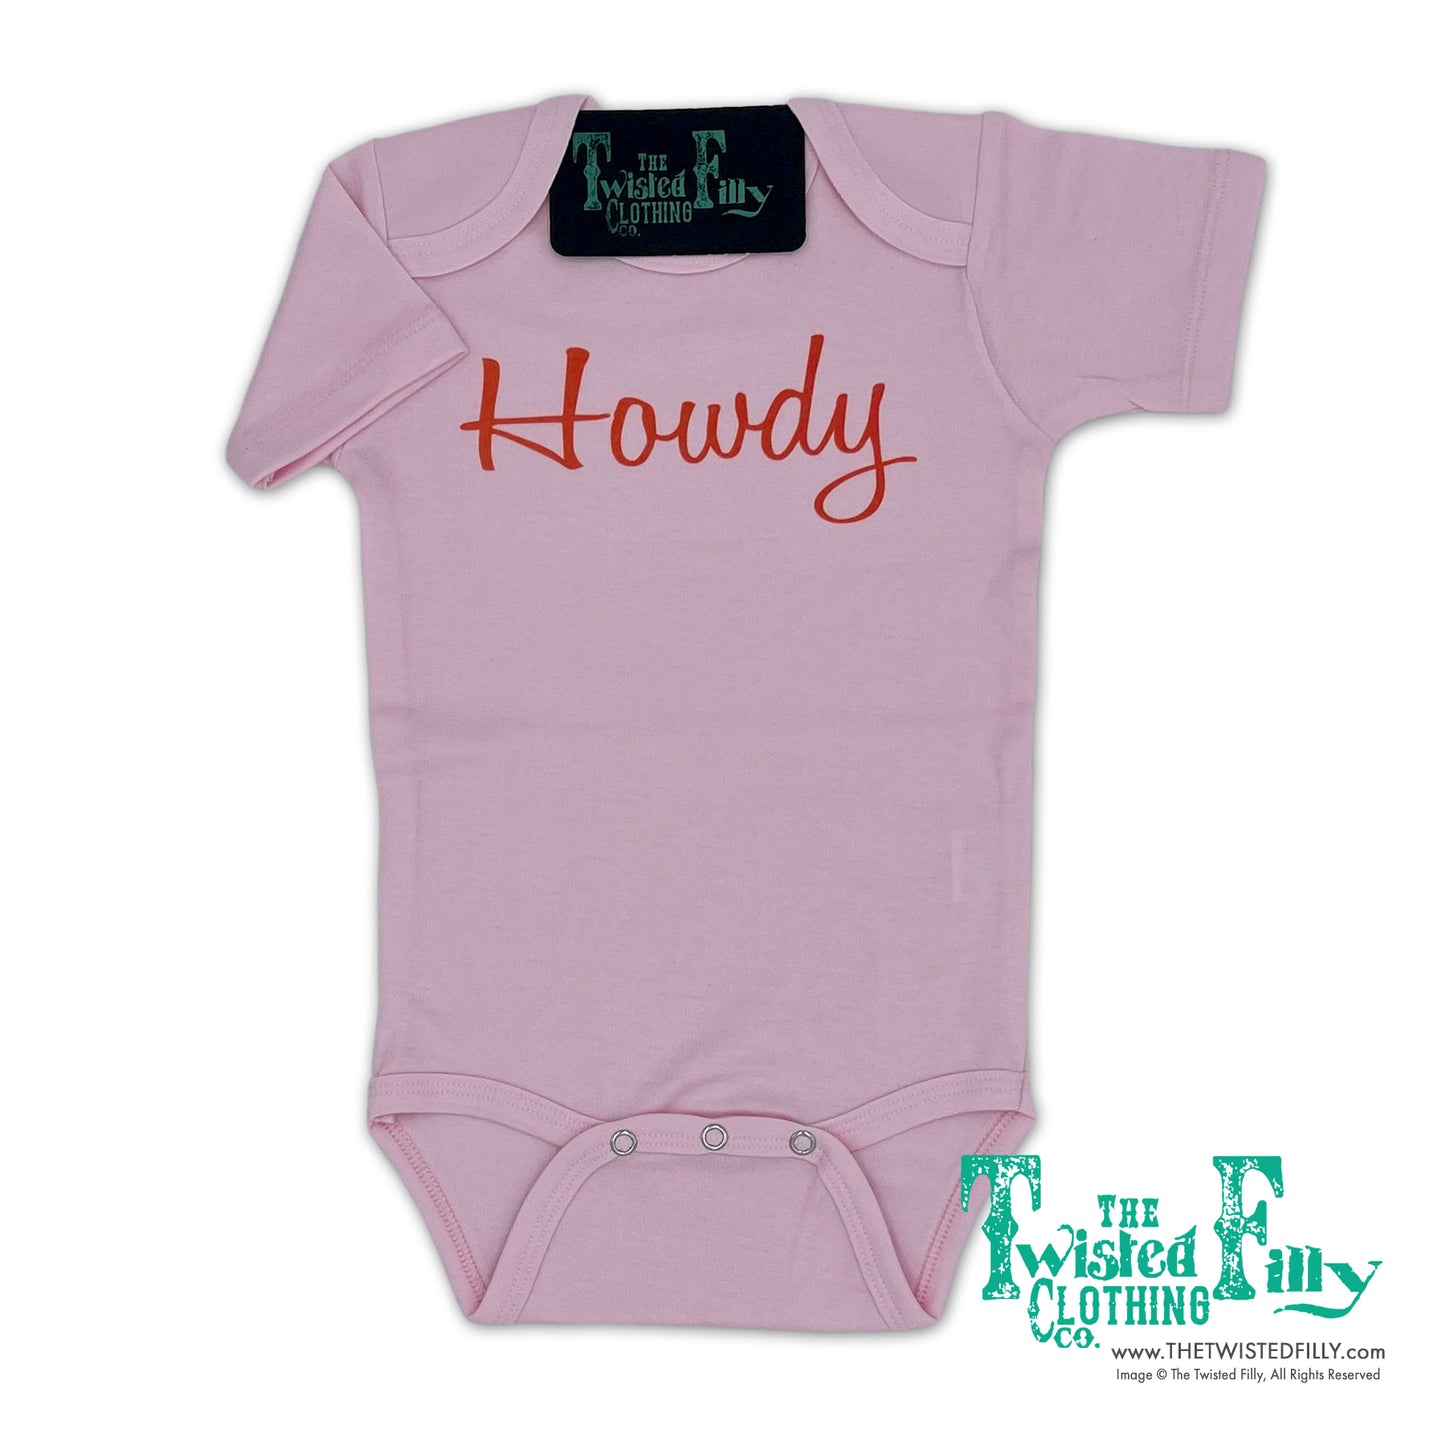 Howdy - S/S Infant One Piece - Pink